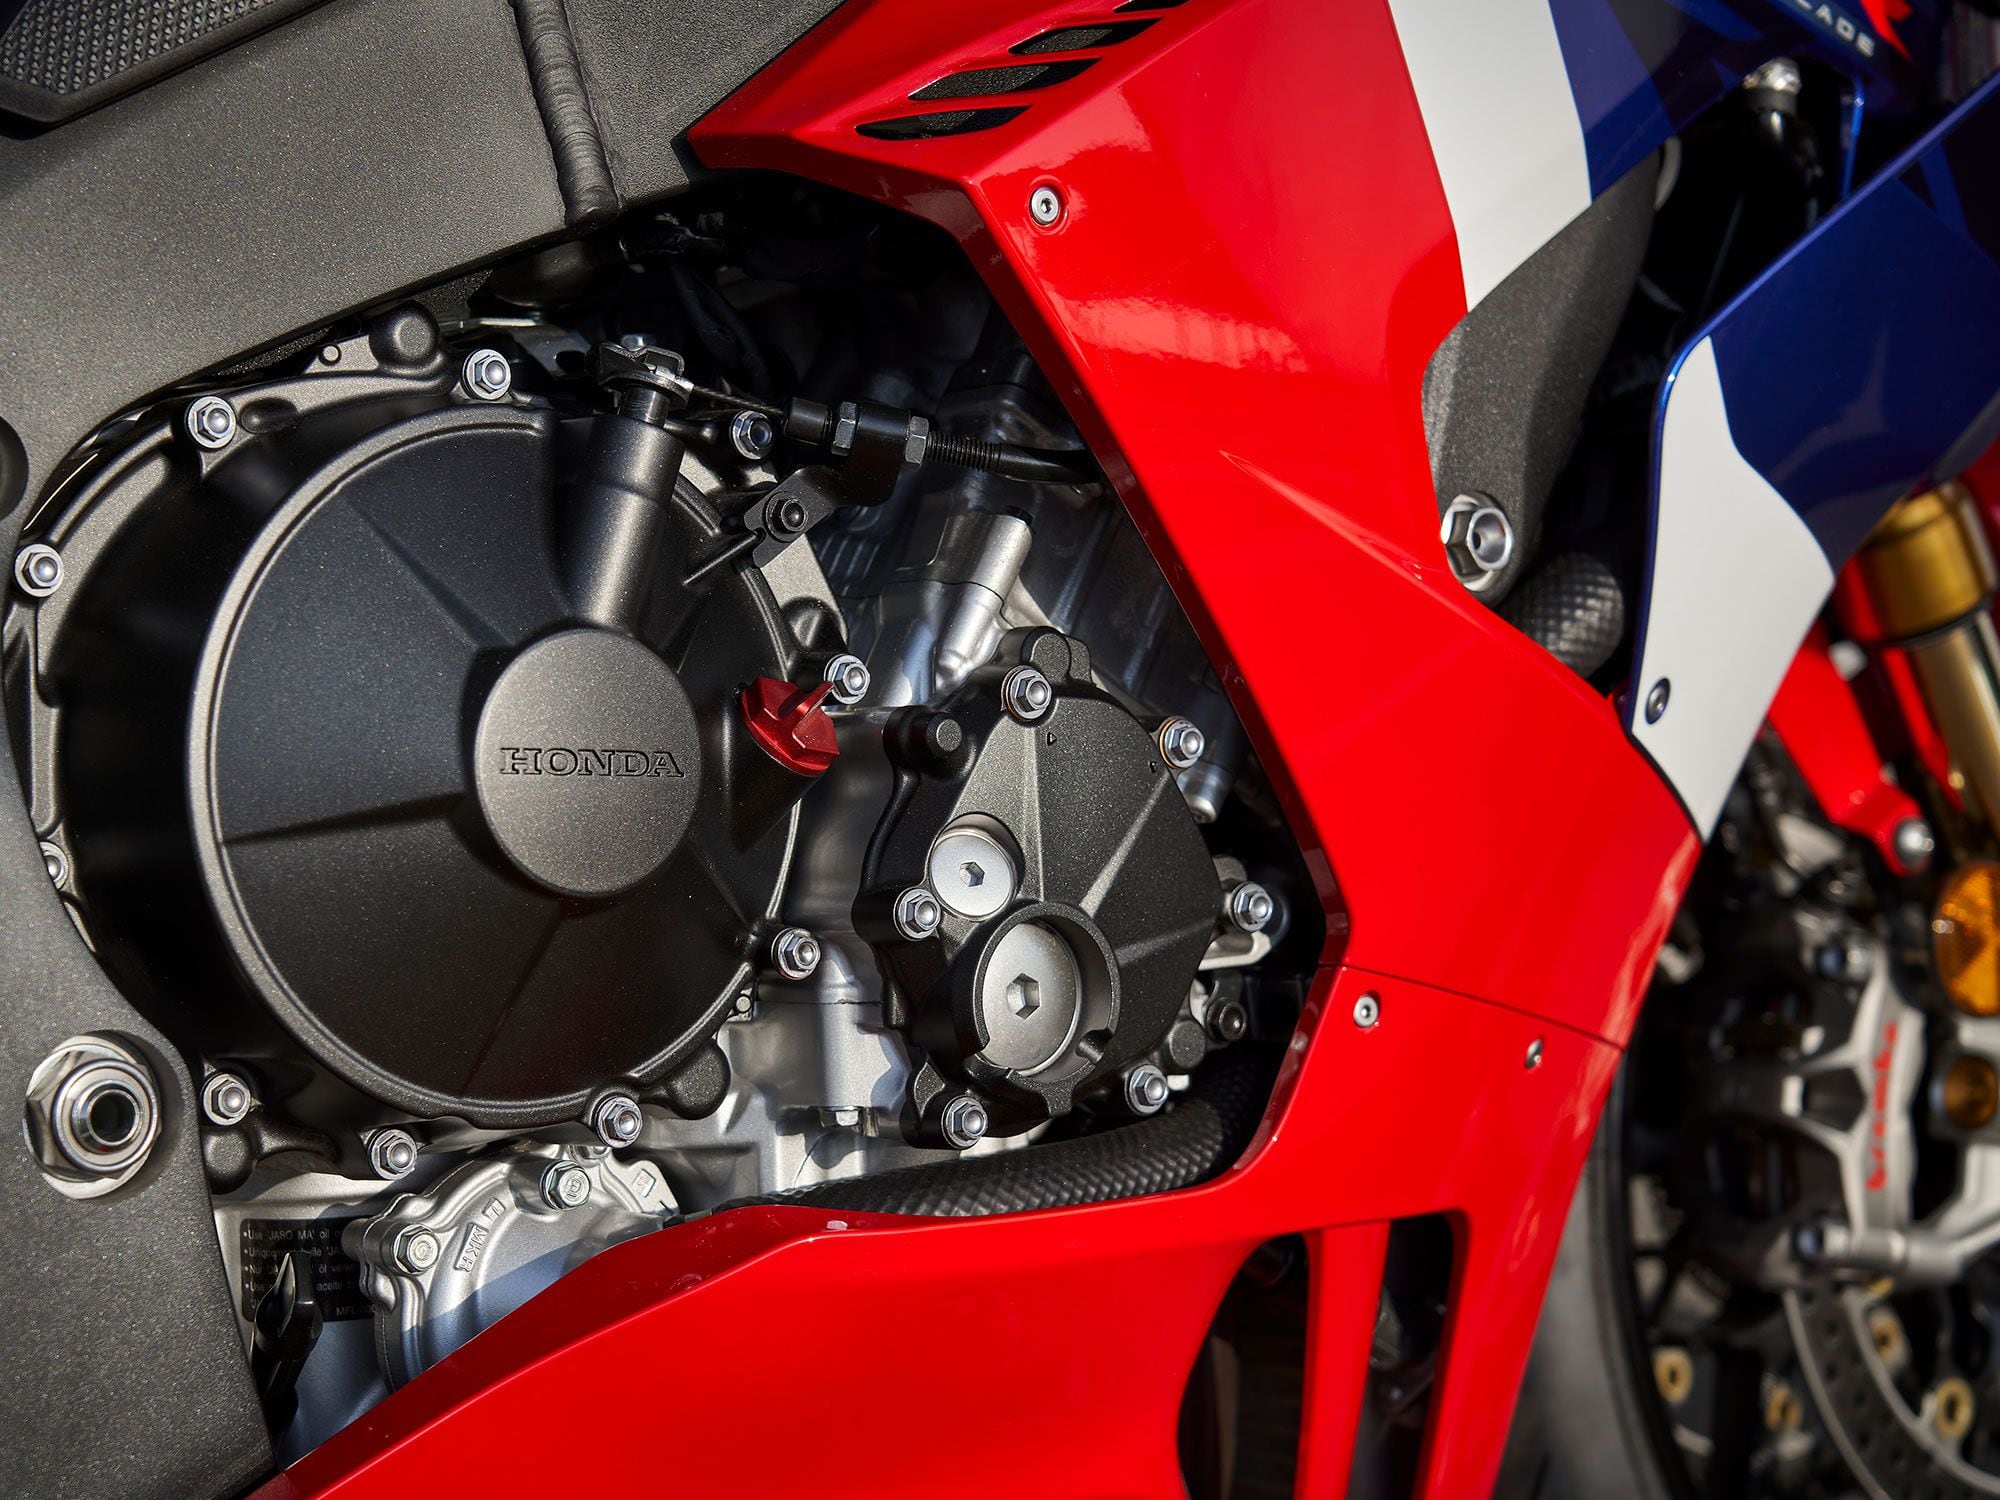 The Fireblade SP is powered by a 999cc inline-four that’s worthy of an addicting 165.4 hp on the <em>Motorcyclist</em> dyno. Not to mention the exciting punch in power above 7,000 rpm!